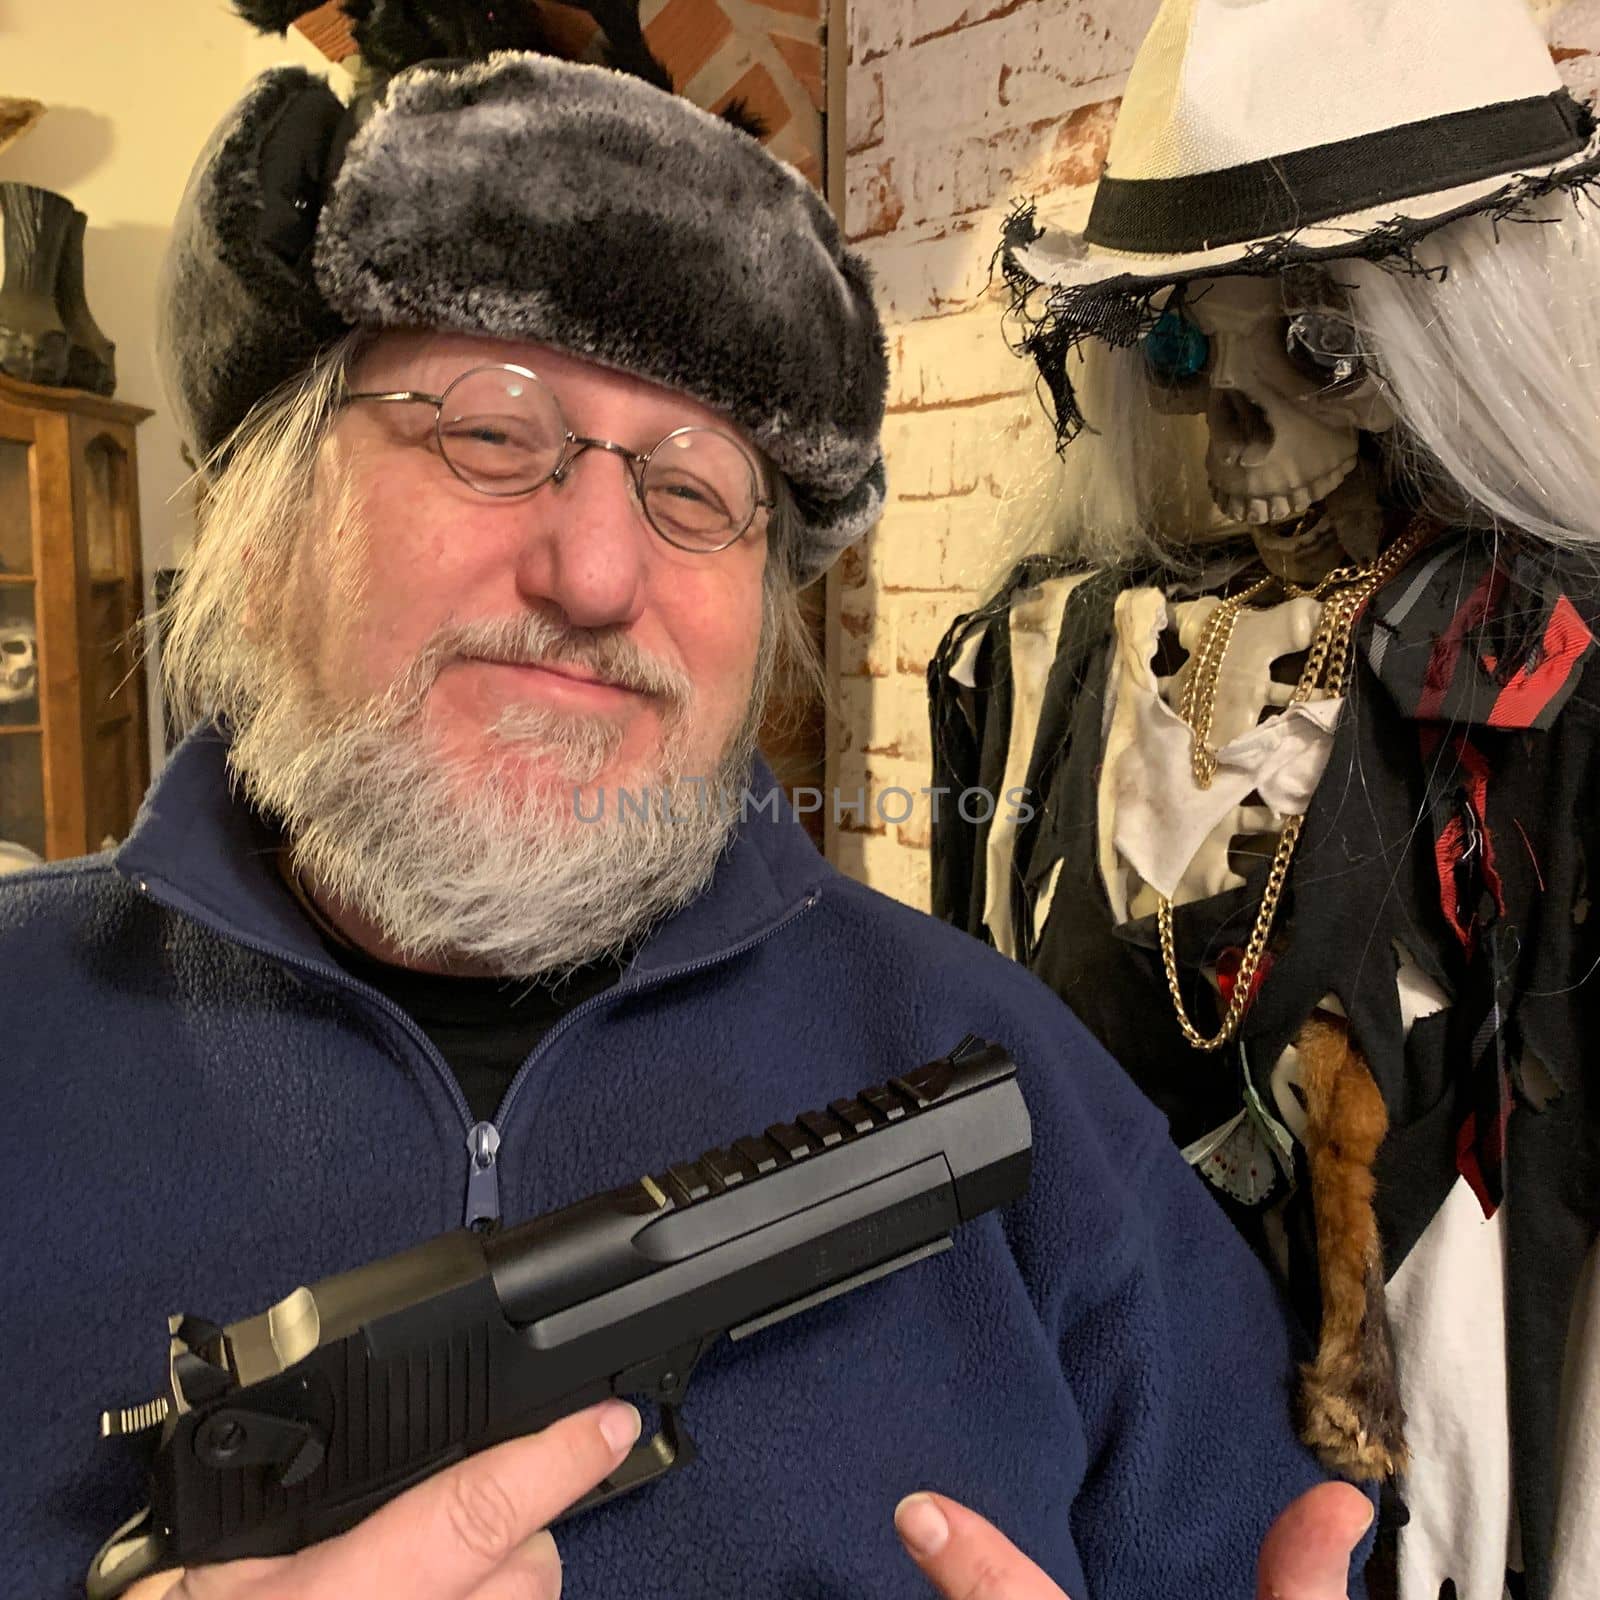 A comedian in a fur hat proudly presenting a gun beside a skeleton